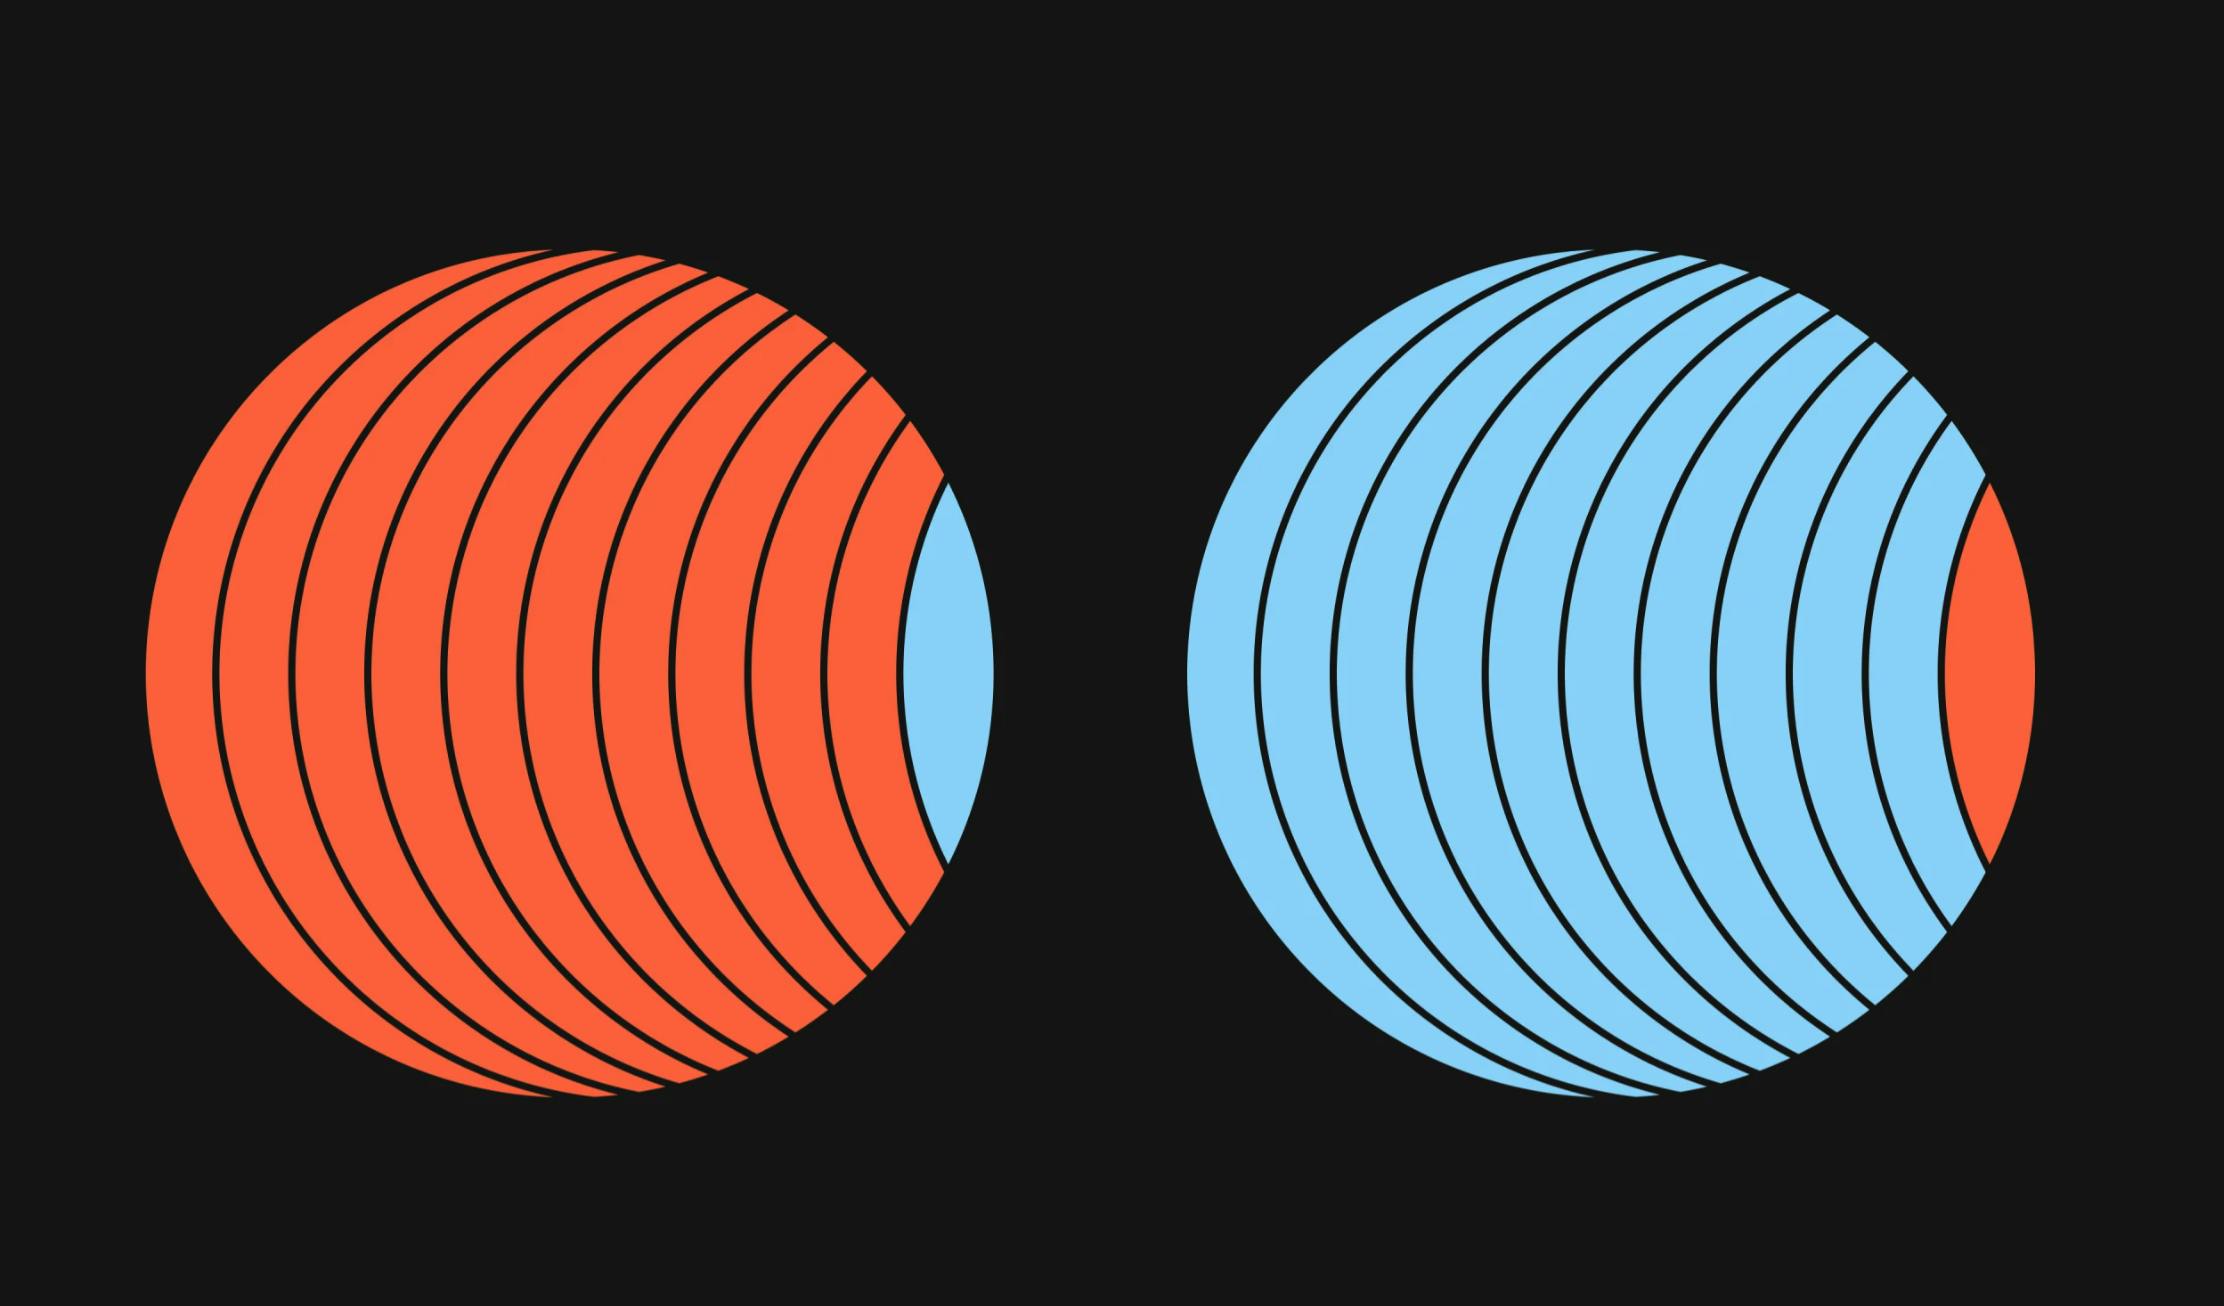 Two circles, one red and one blue, side by side on a black background